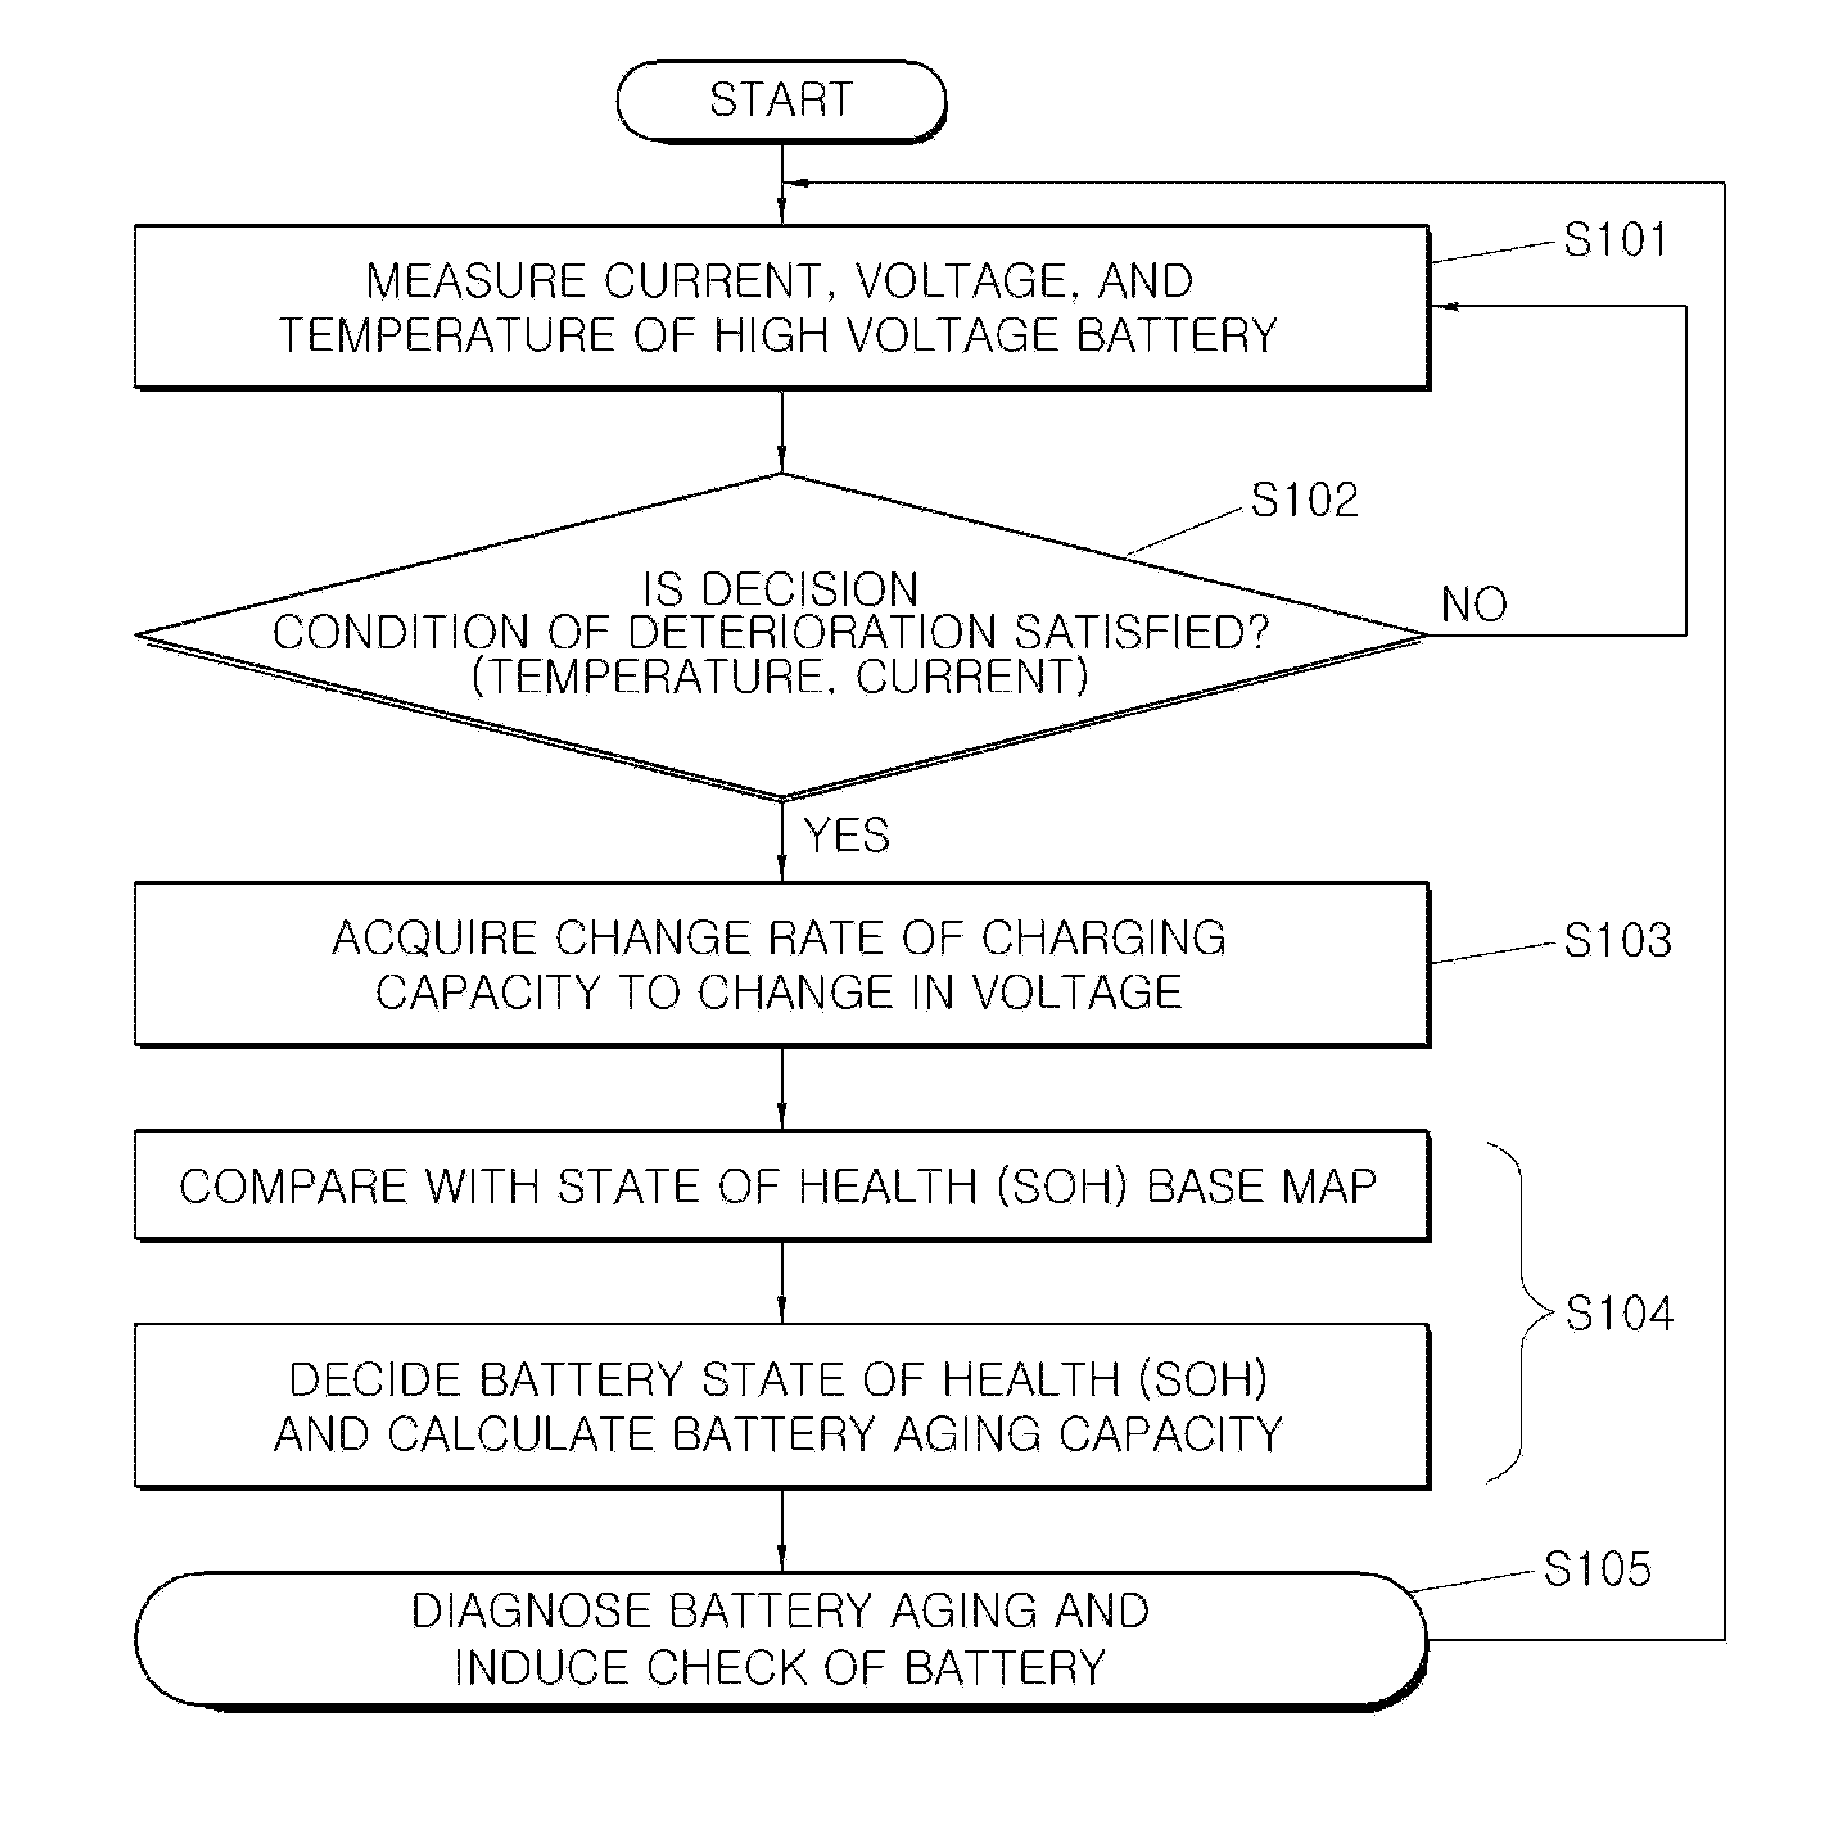 Apparatus and method for estimating deterioration of battery pack